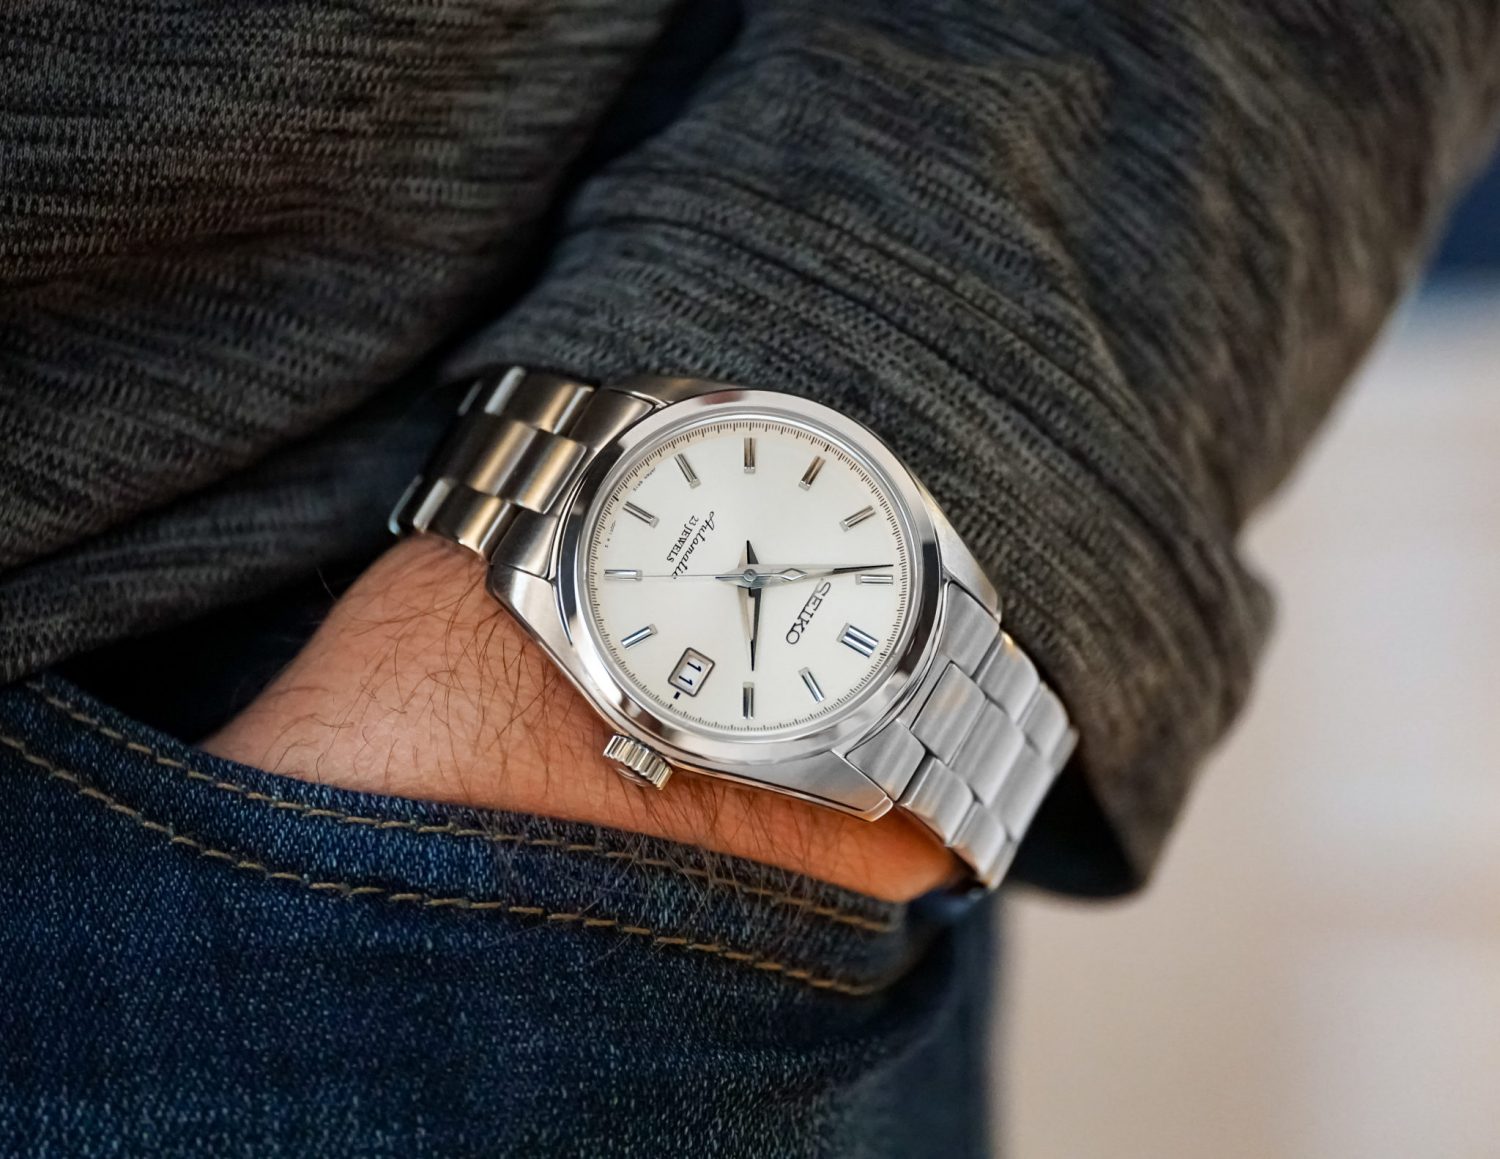 Seiko SARB035 Review & Complete Guide - Millenary Watches